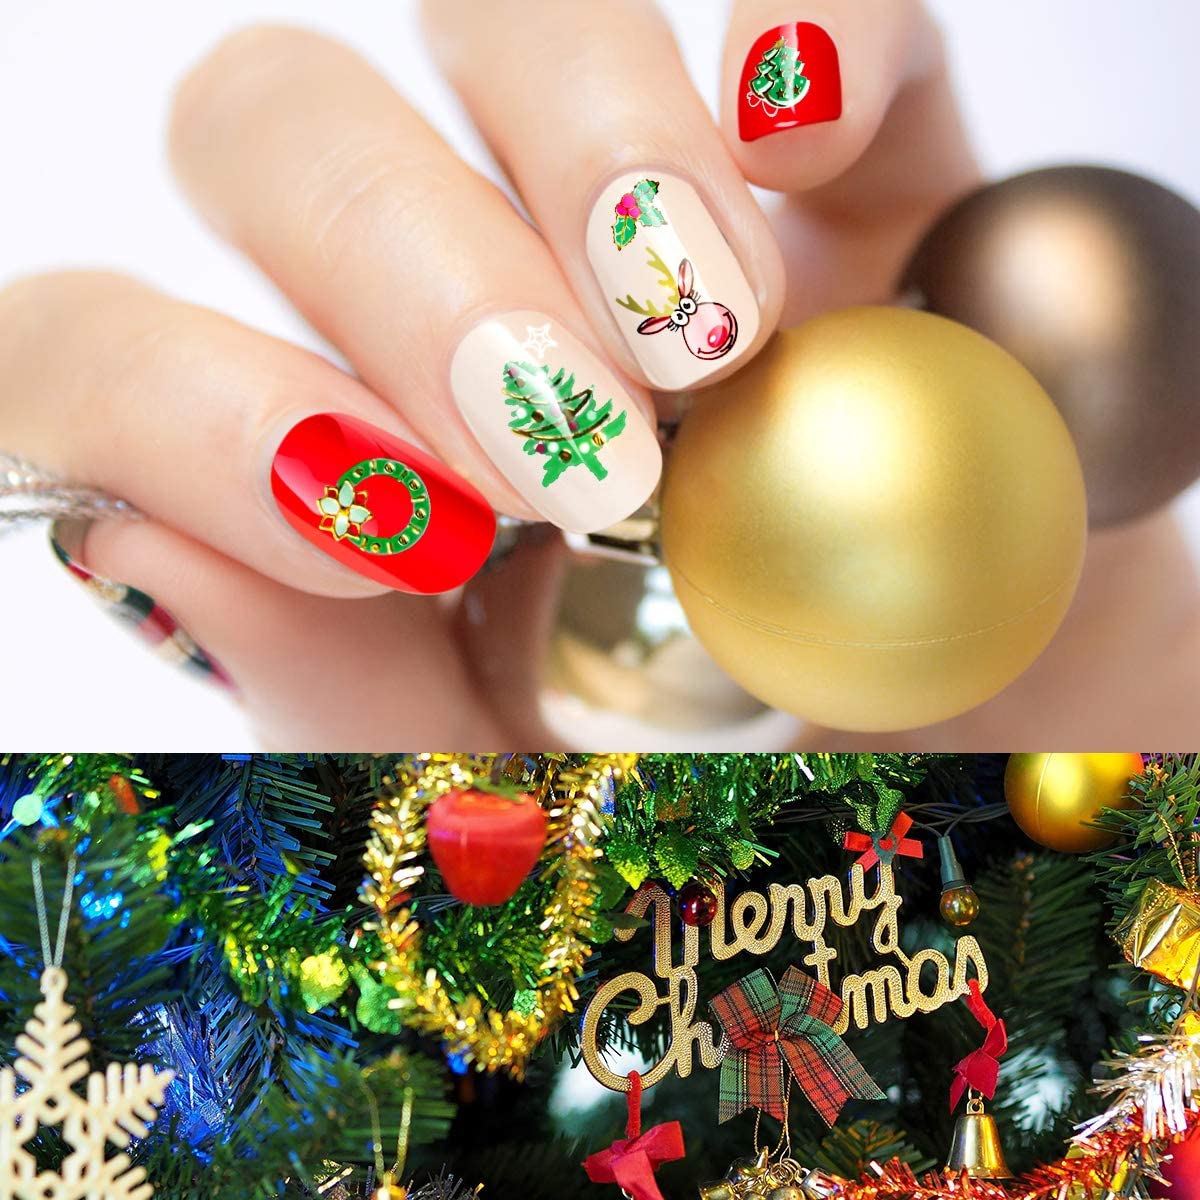 Interested in getting our latest Christmas Nail Stickers? PM us for more details.
An Amazing 380PCS 3D Metal Design Nail stickers. #nails #nailsofinstagram #nailstickers #nailinspiration #nailartwow #nailsforever #acrylicnails #nailsdid #prettydiva#review